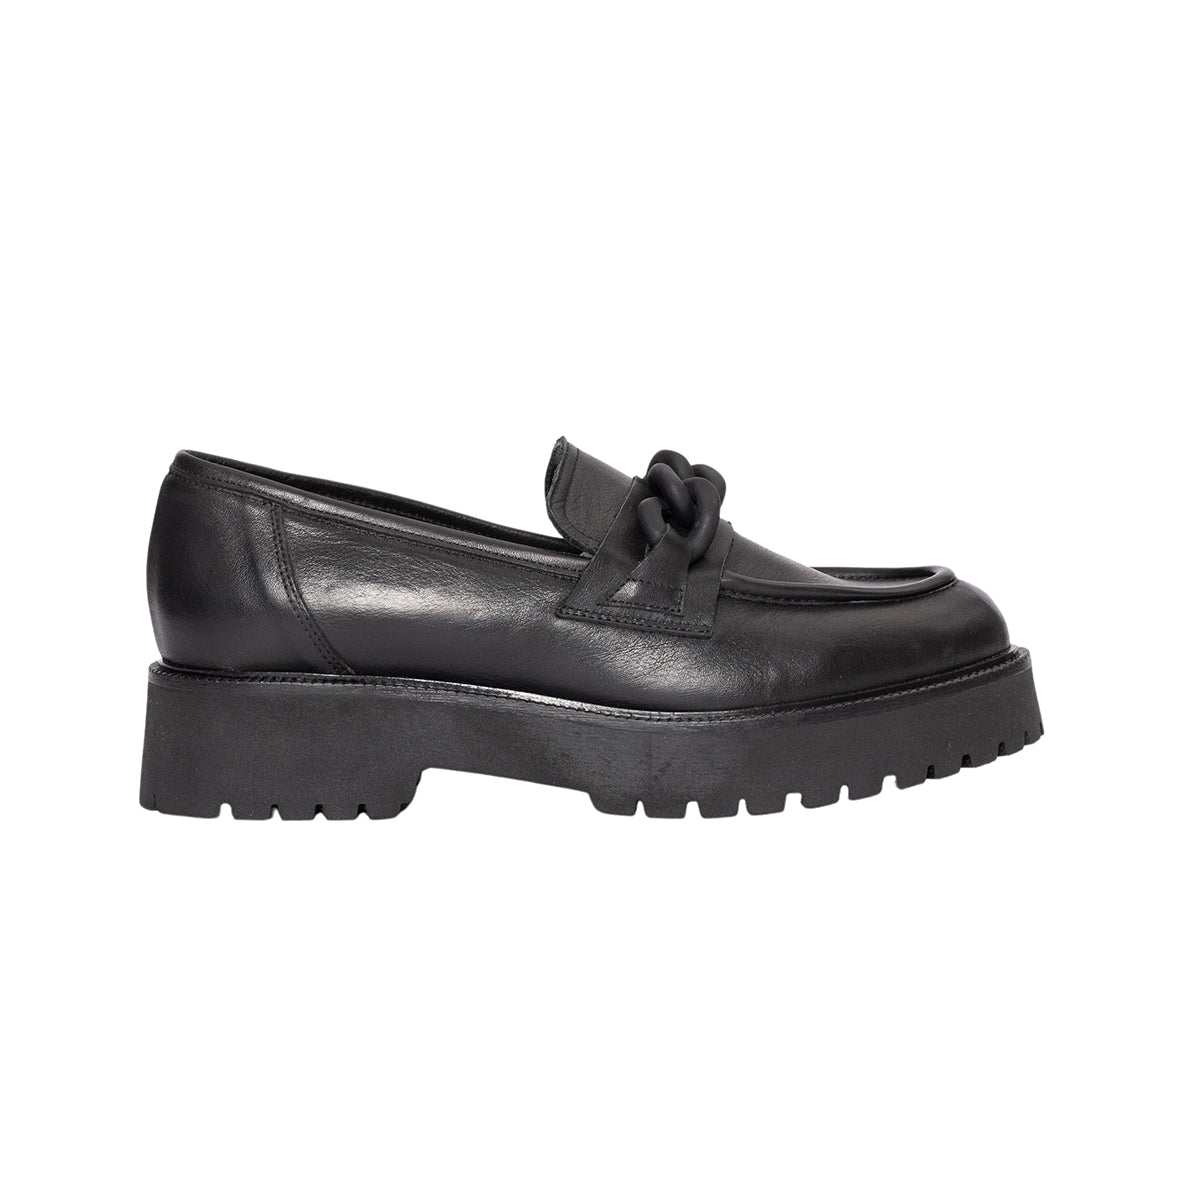 Ateliers Kade Black Leather Loafer